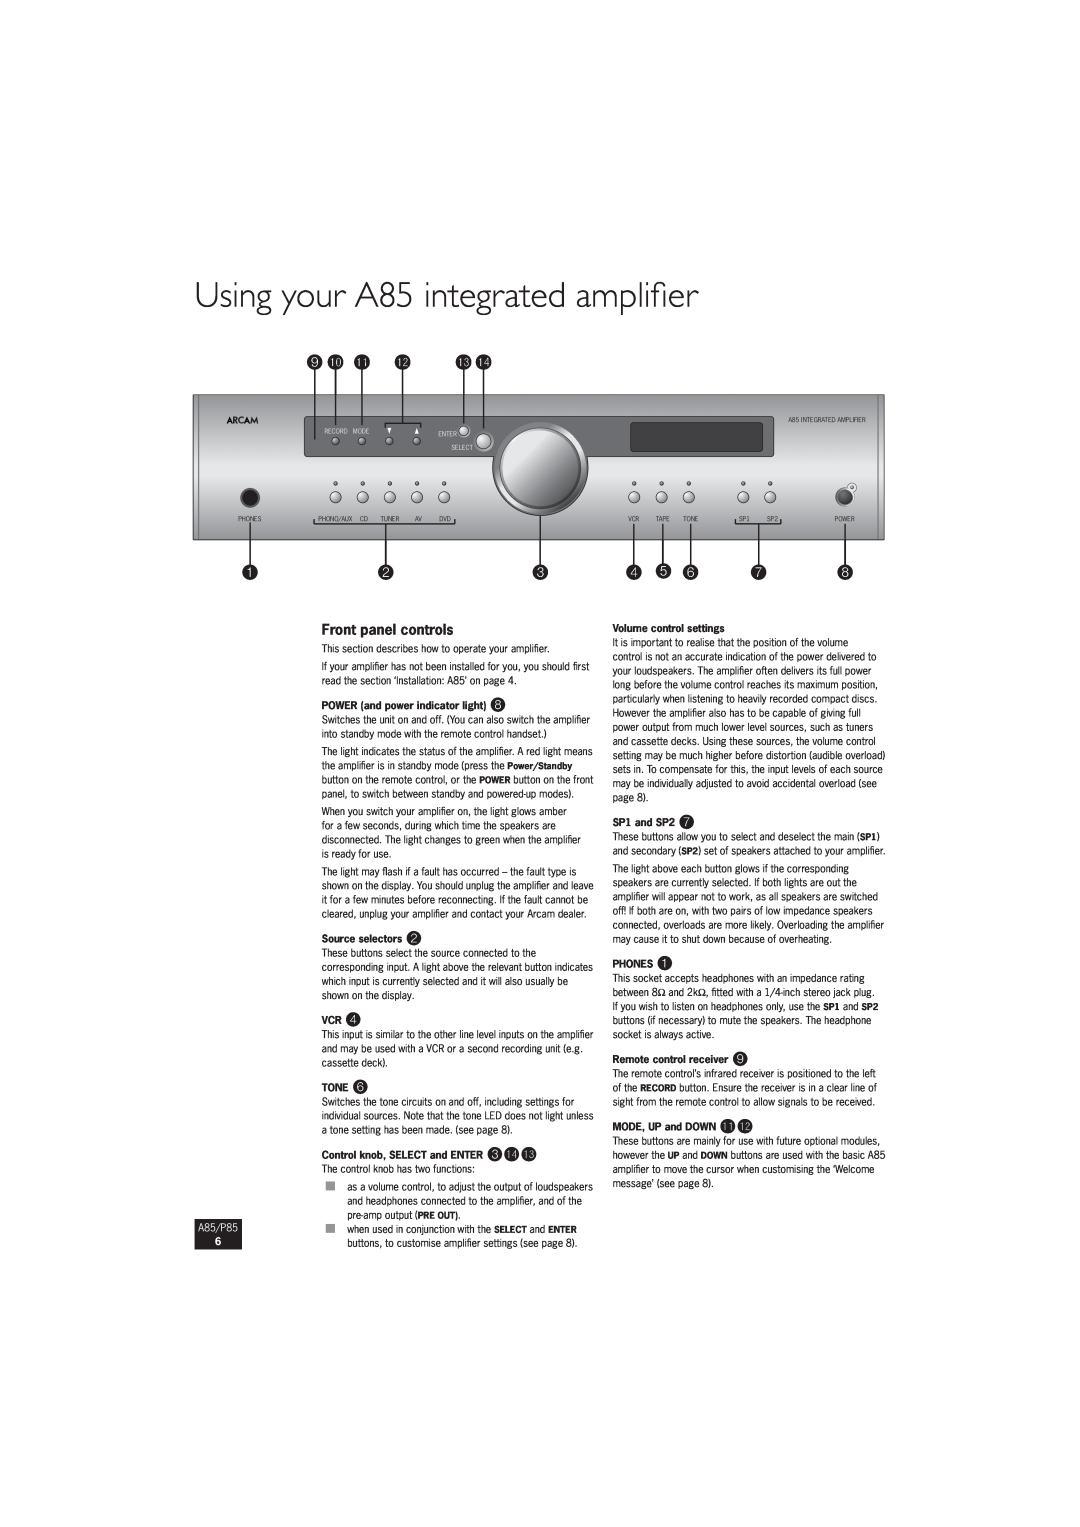 Arcam P85 Using your A85 integrated ampliﬁer, 9bk bl bm, Front panel controls, POWER and power indicator light, Tone, bnbo 